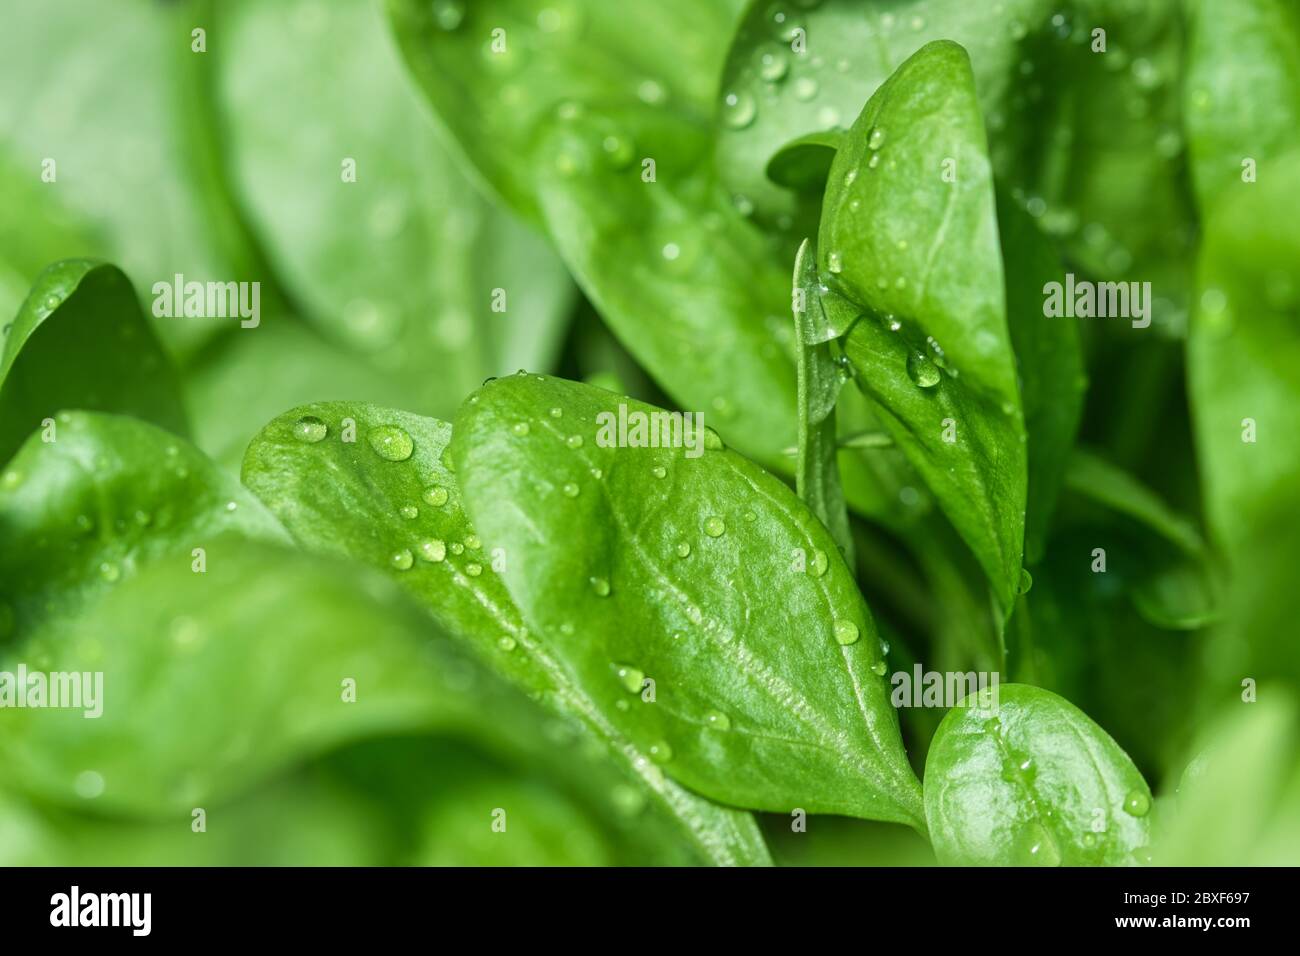 Spinach baby leaf growing in the spring garden, fresh green leaves with water drops on, close up, healthy organic food and self sufficency concept Stock Photo